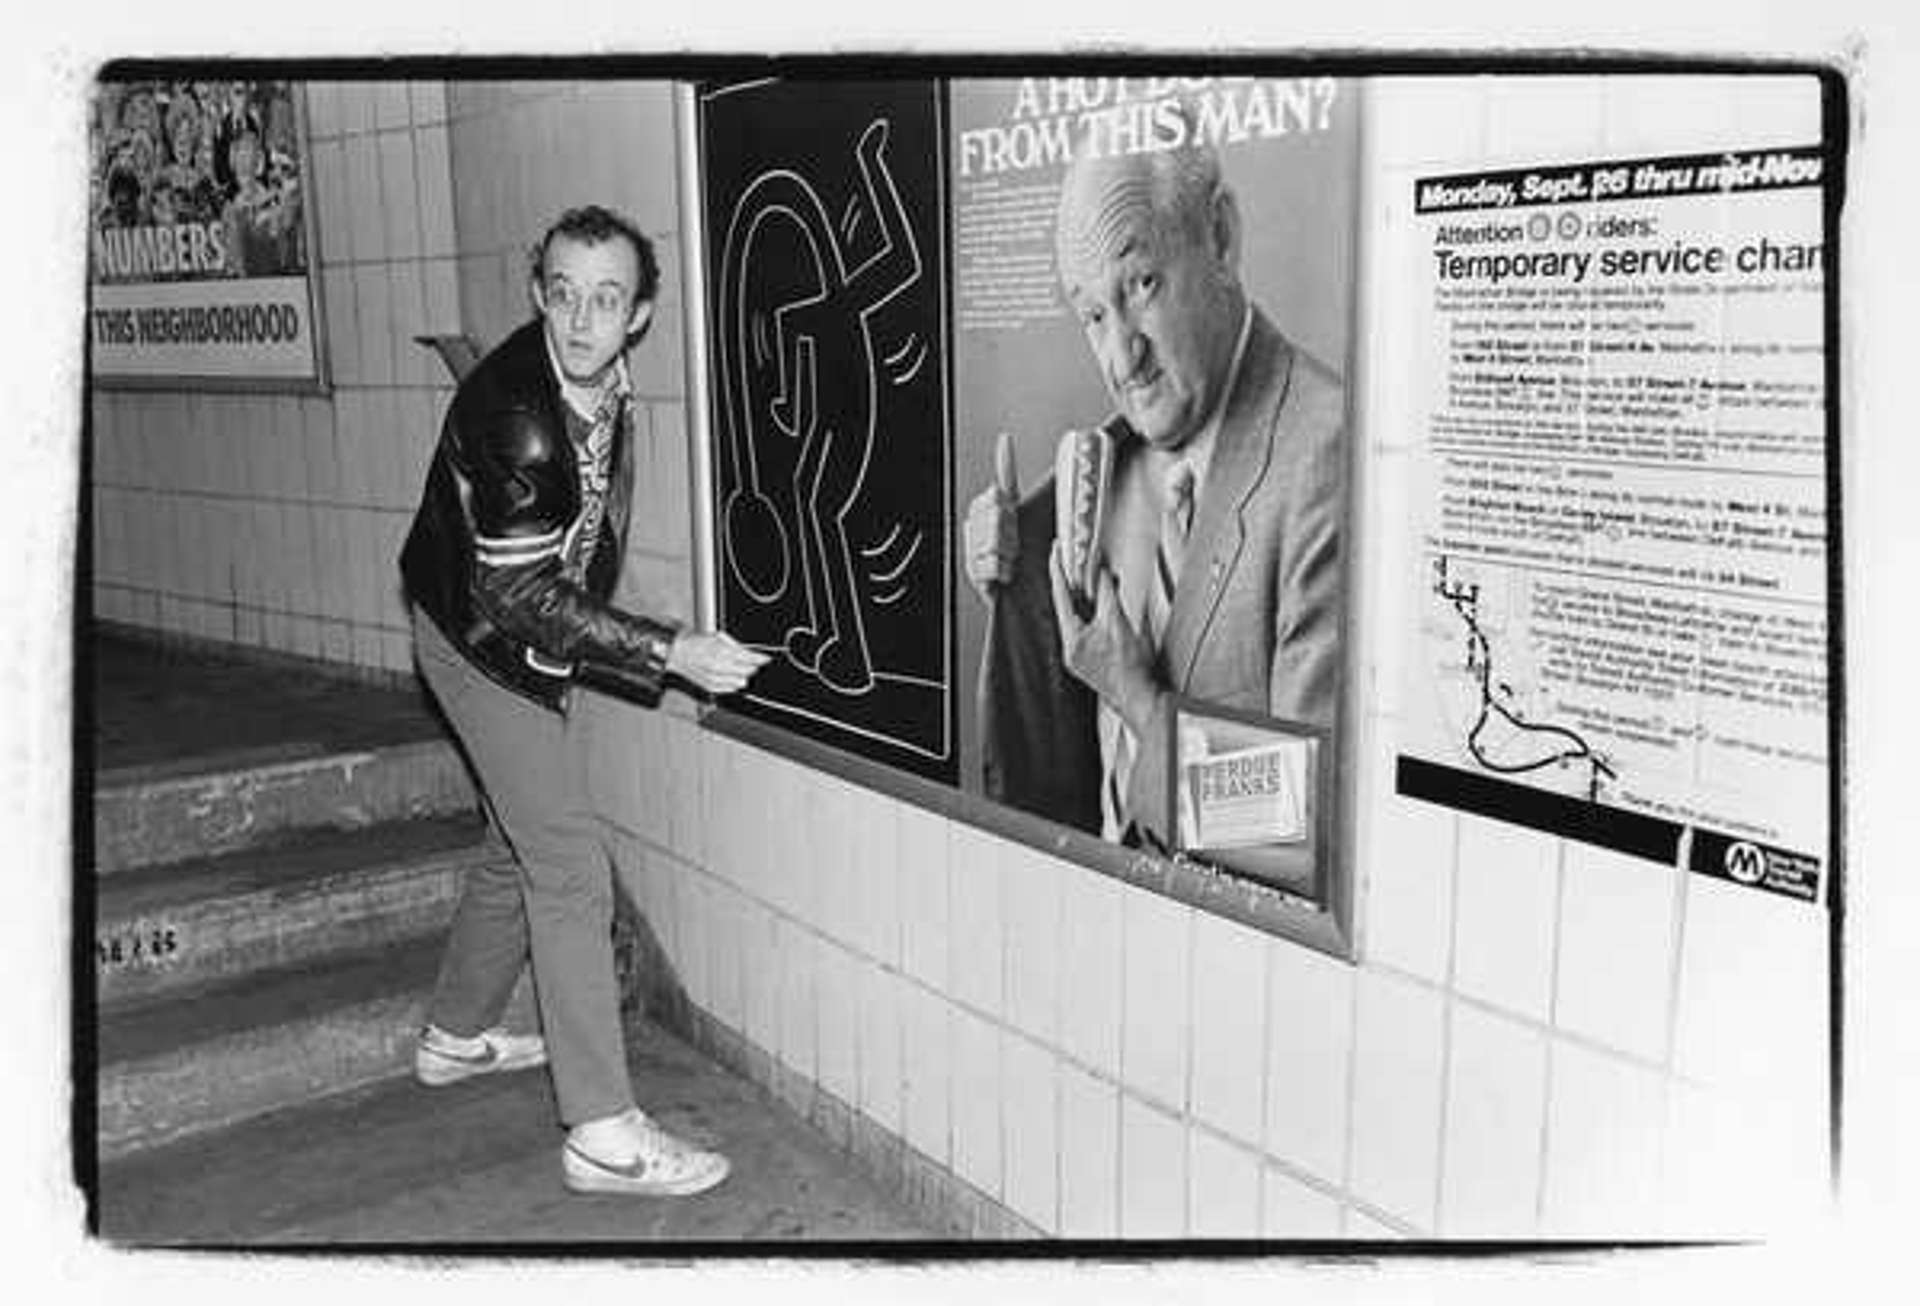 Keith Haring at work on one of his Subway Drawings in New York. The artist poses with his chalk by the black and white drawing, which depicts a dancing figure with a long drooping neck.